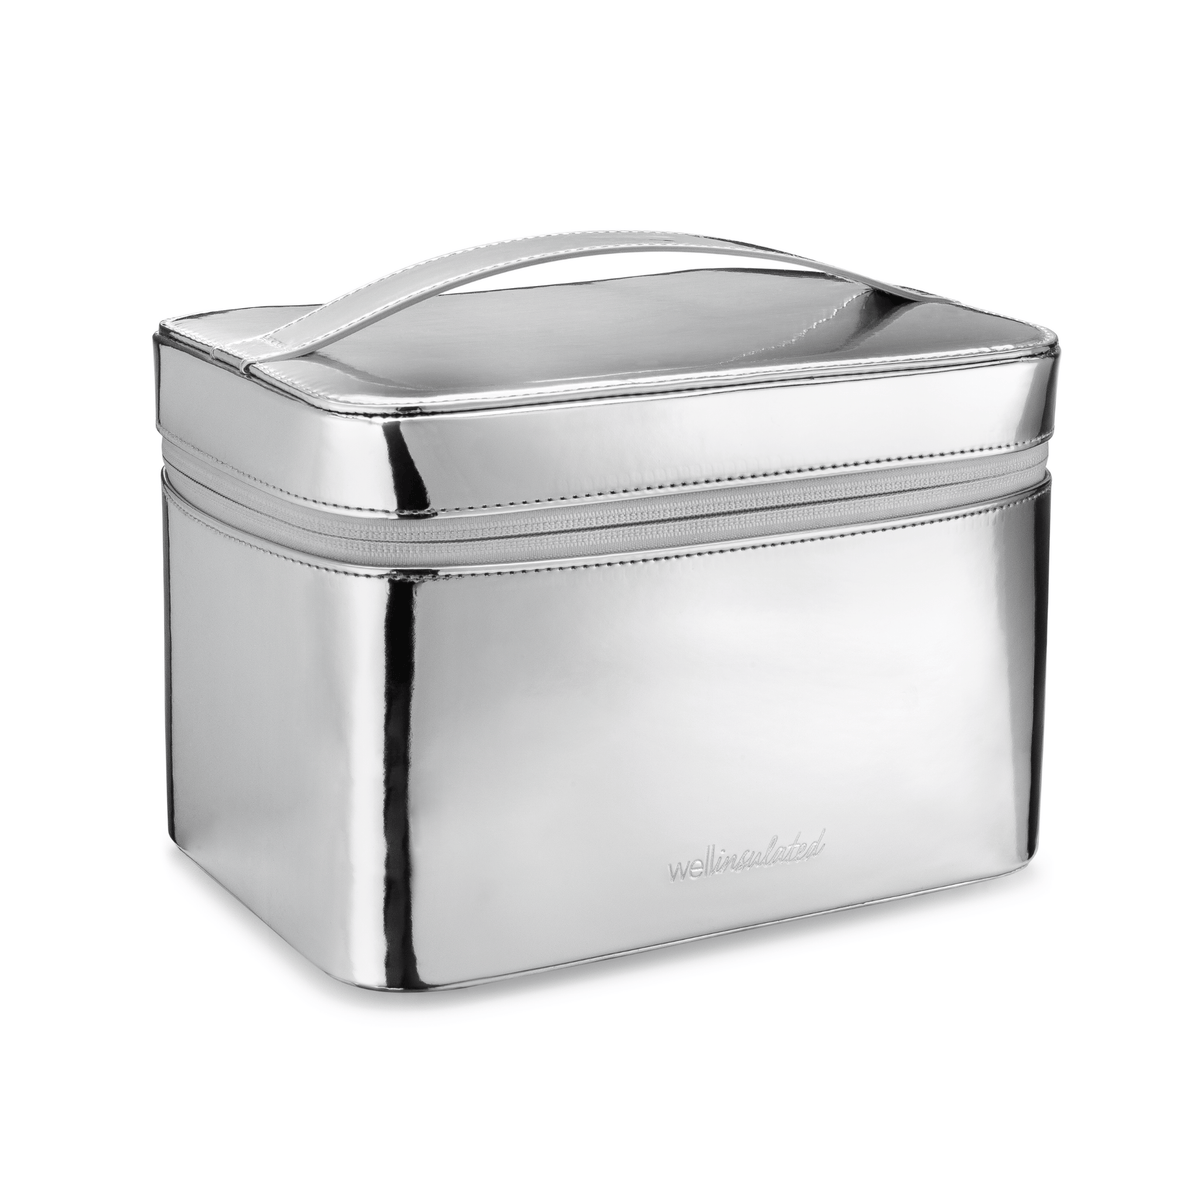 Wellinsulated Performance Travel Beauty Case, Silver, Travel Commuting & Luggage Bags Makeup & Cosmetic Bags